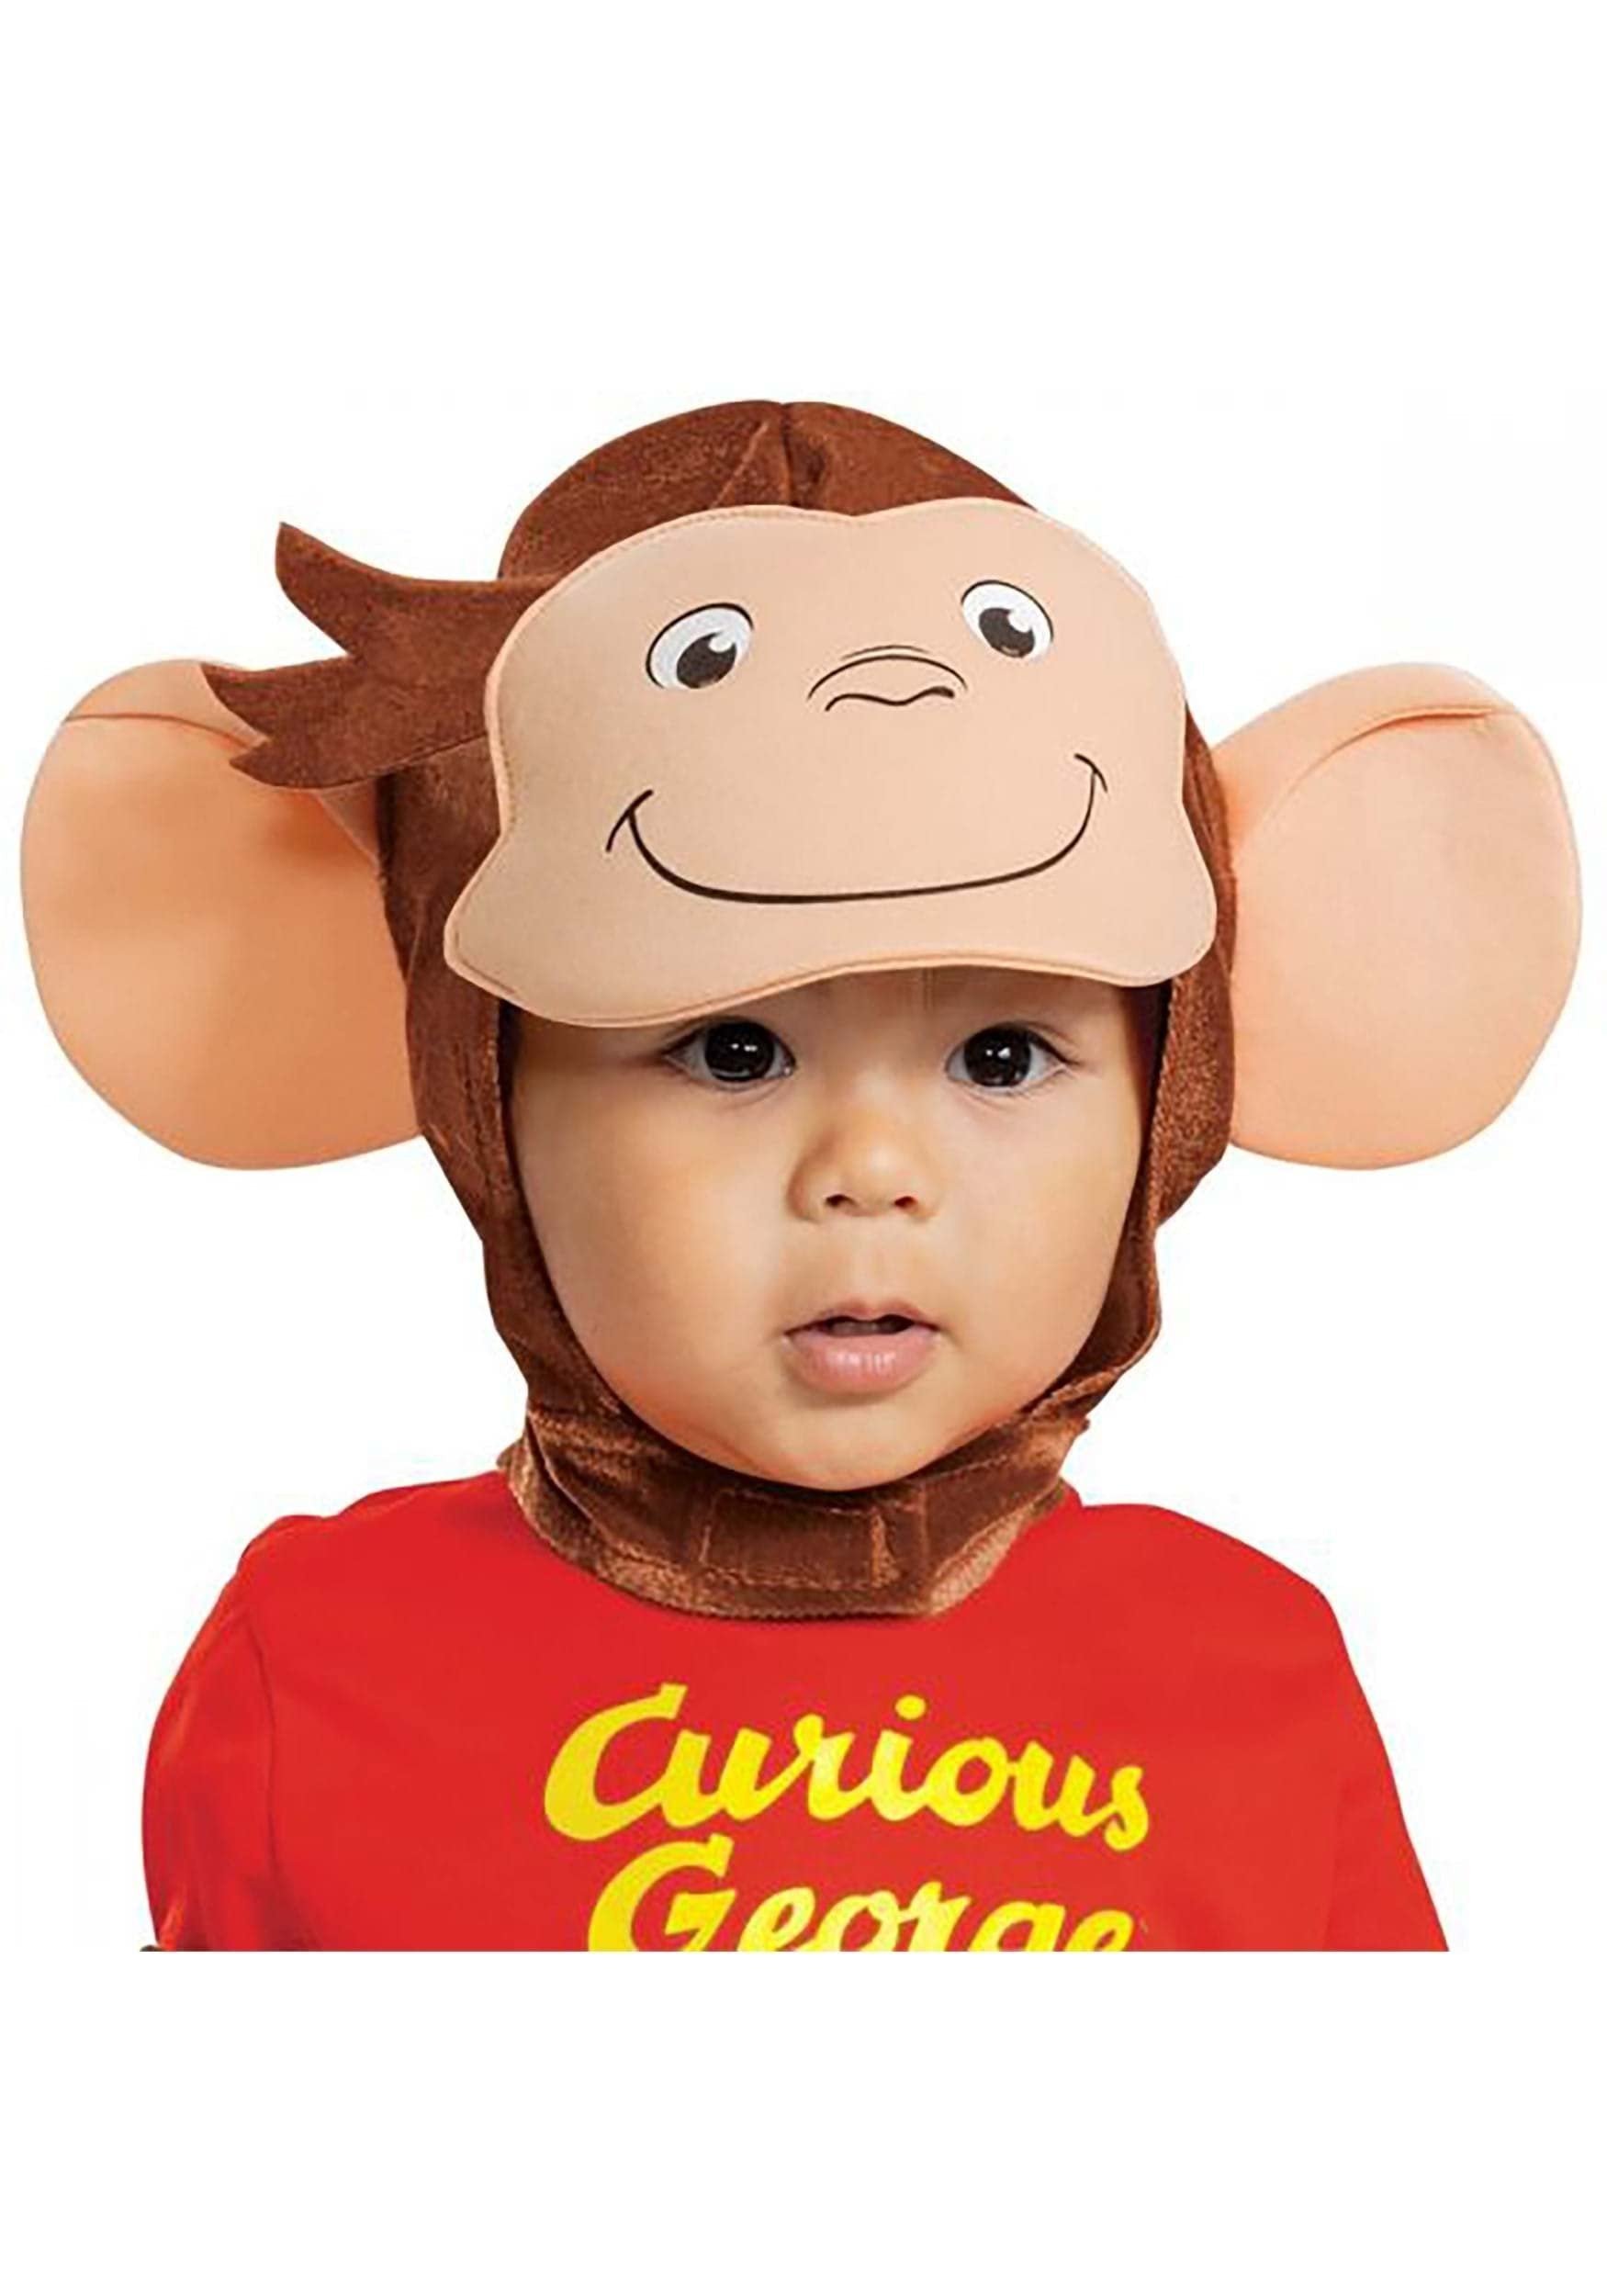 Disguise Curious George Costume for Kids, Official Curious George Costume, Toddler Size Small (2T)